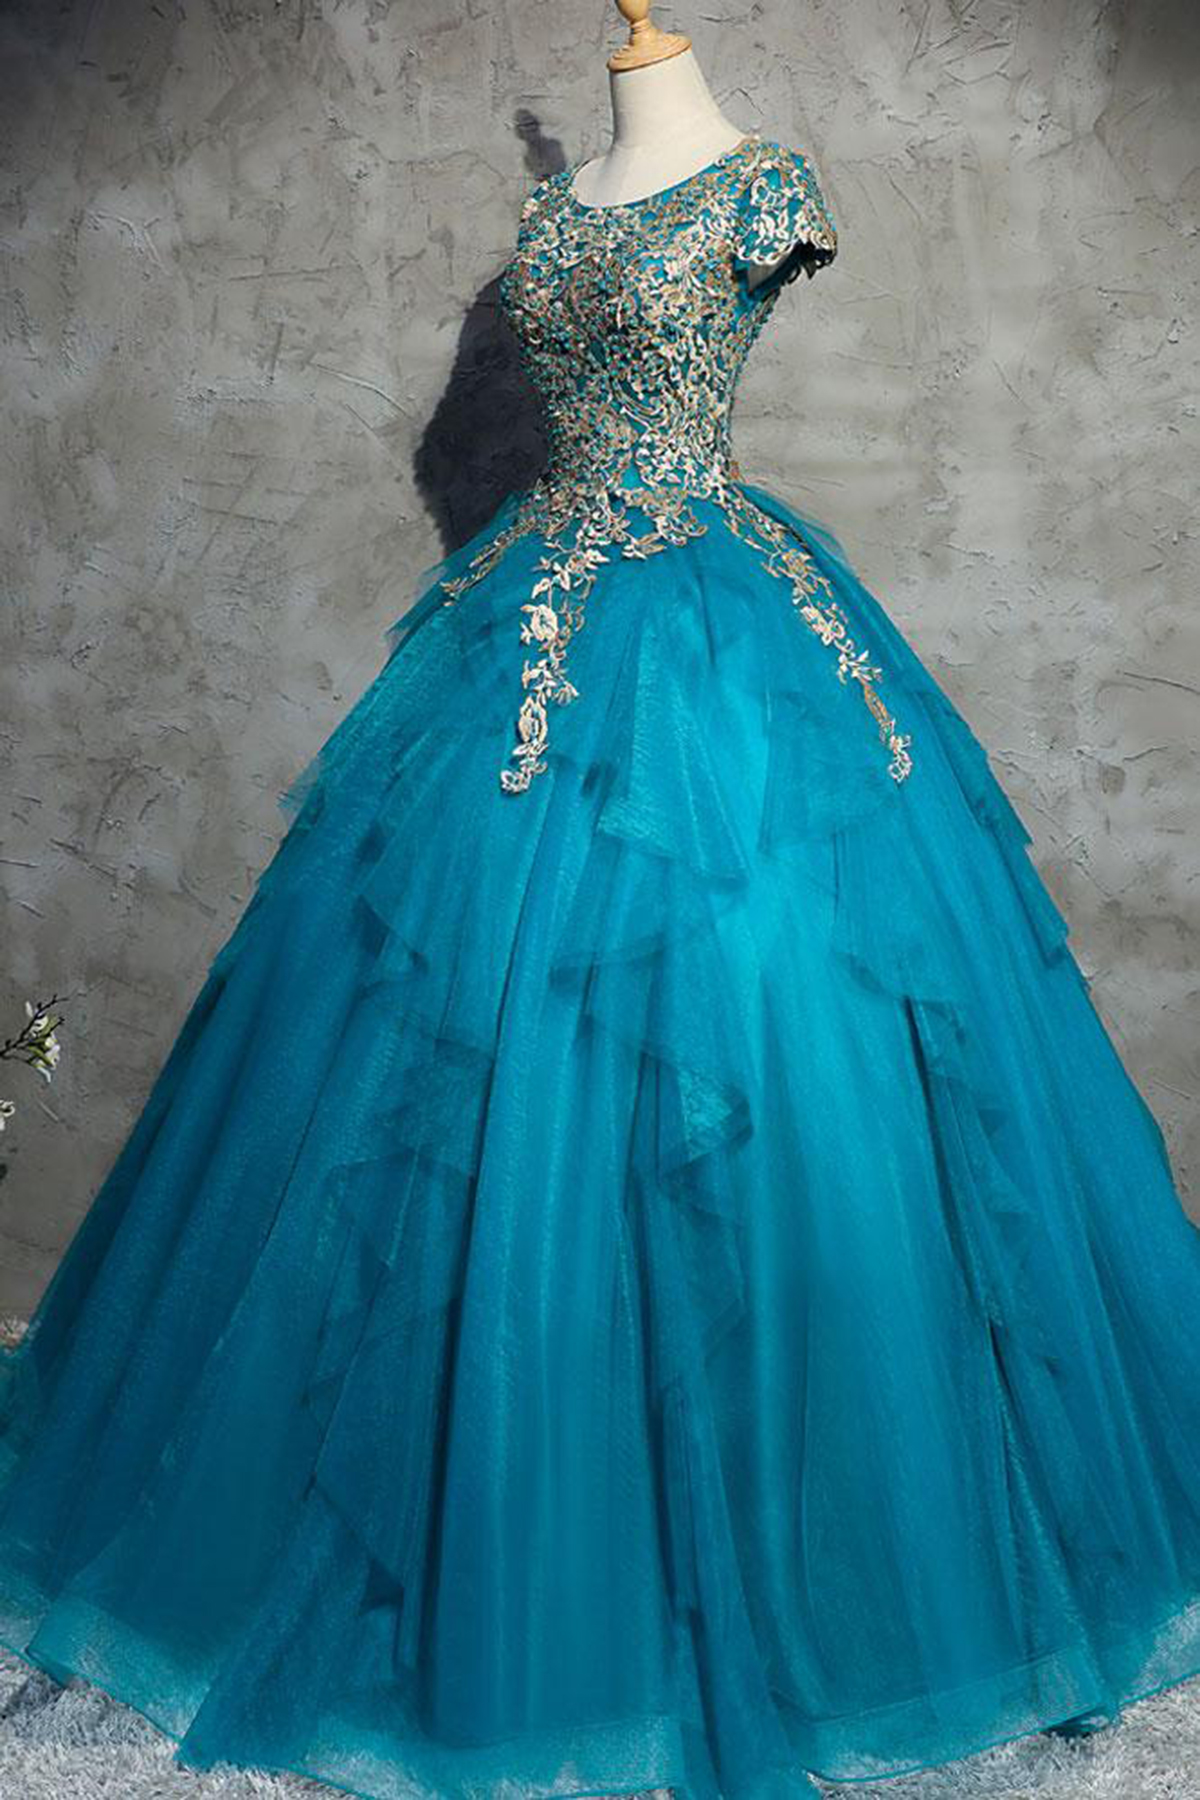 Unique Blue Tulle Lace Top Round Neck Winter Formal Prom Dresses, Long Evening Dress With Sleeves